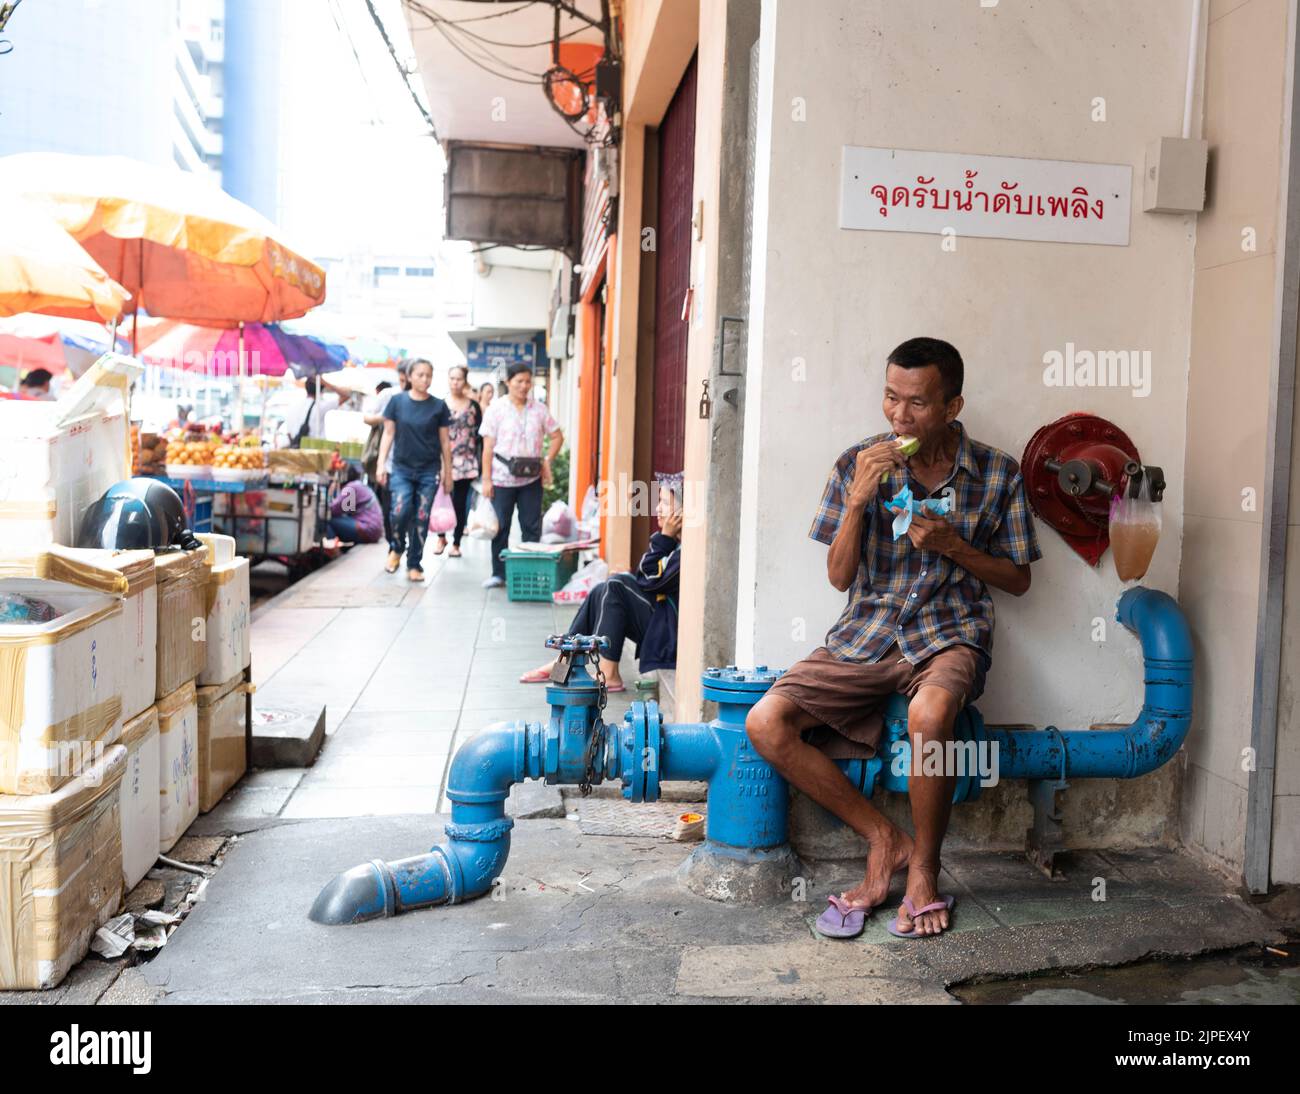 BANGKOK, THAILAND. April 1, 2016. Famous Chinatown in Bangkok. Colorful streets and everyday life. Thai people portrait Stock Photo